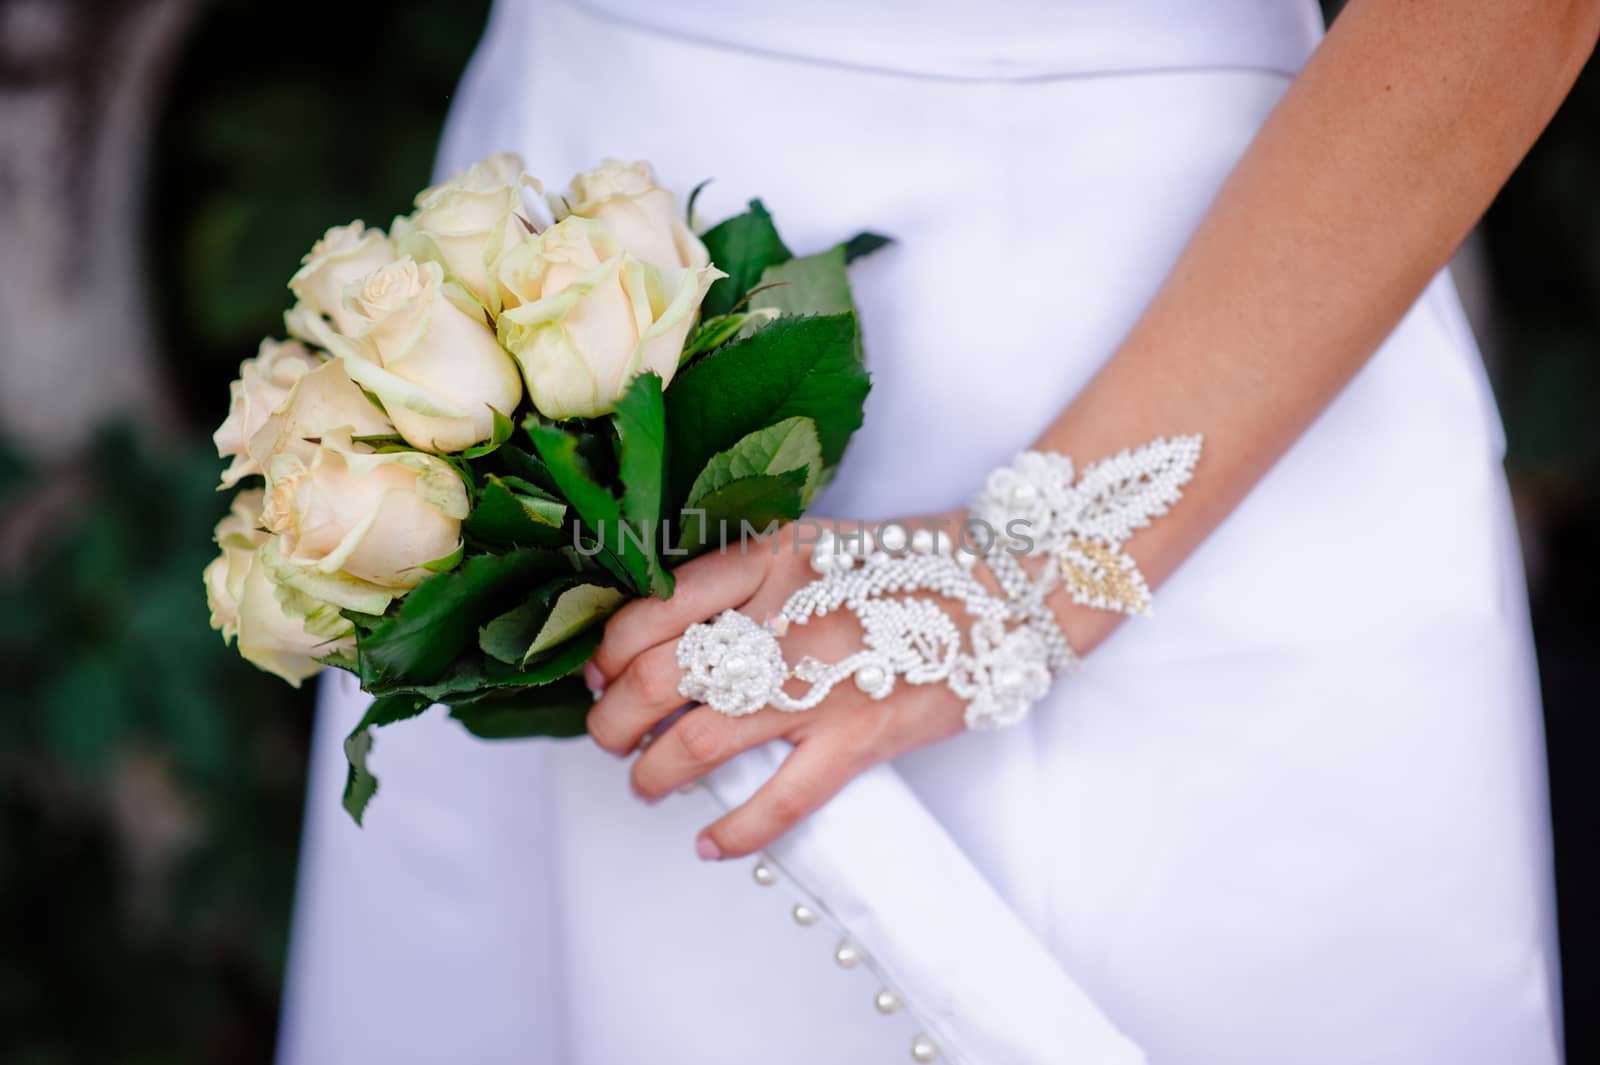 wedding bouquet at bride's hands by timonko